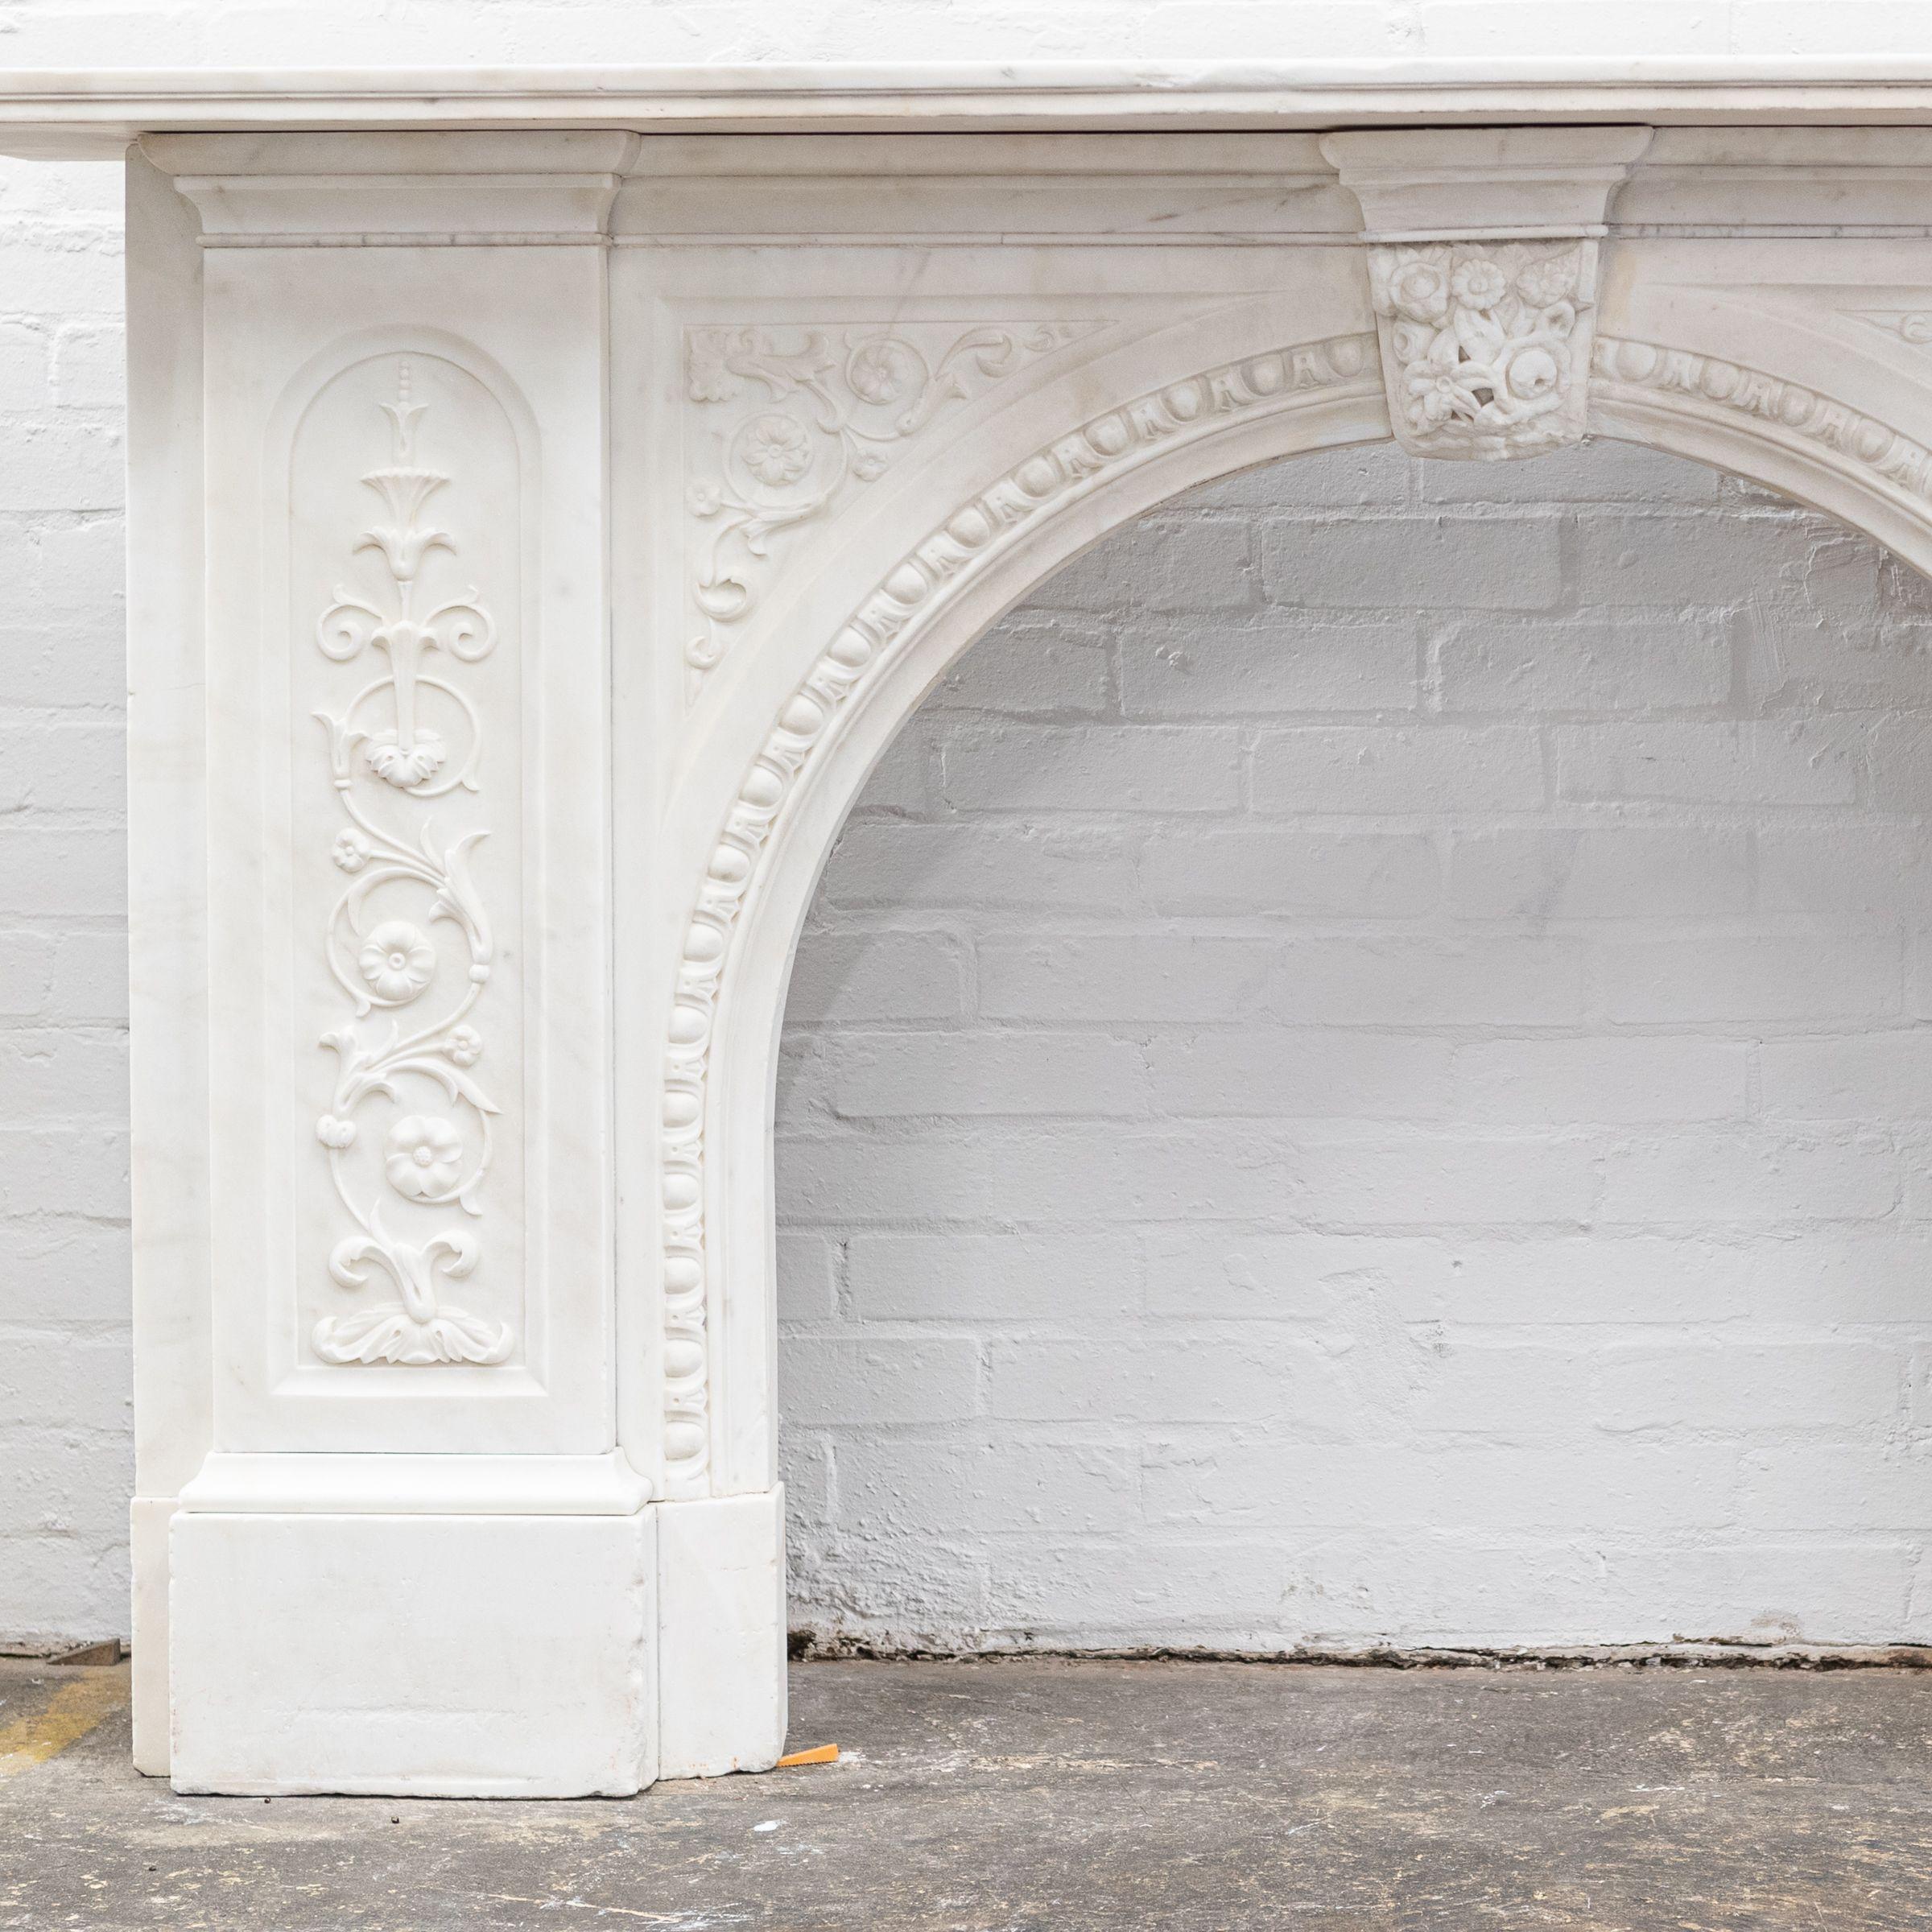 A substantial and striking fireplace surround with ornate carvings and crafted from statuary marble.

This original Victorian fireplace features carved floral bouquets repeated down the panelled length of each jamb. The moulded bevelled shelf sits